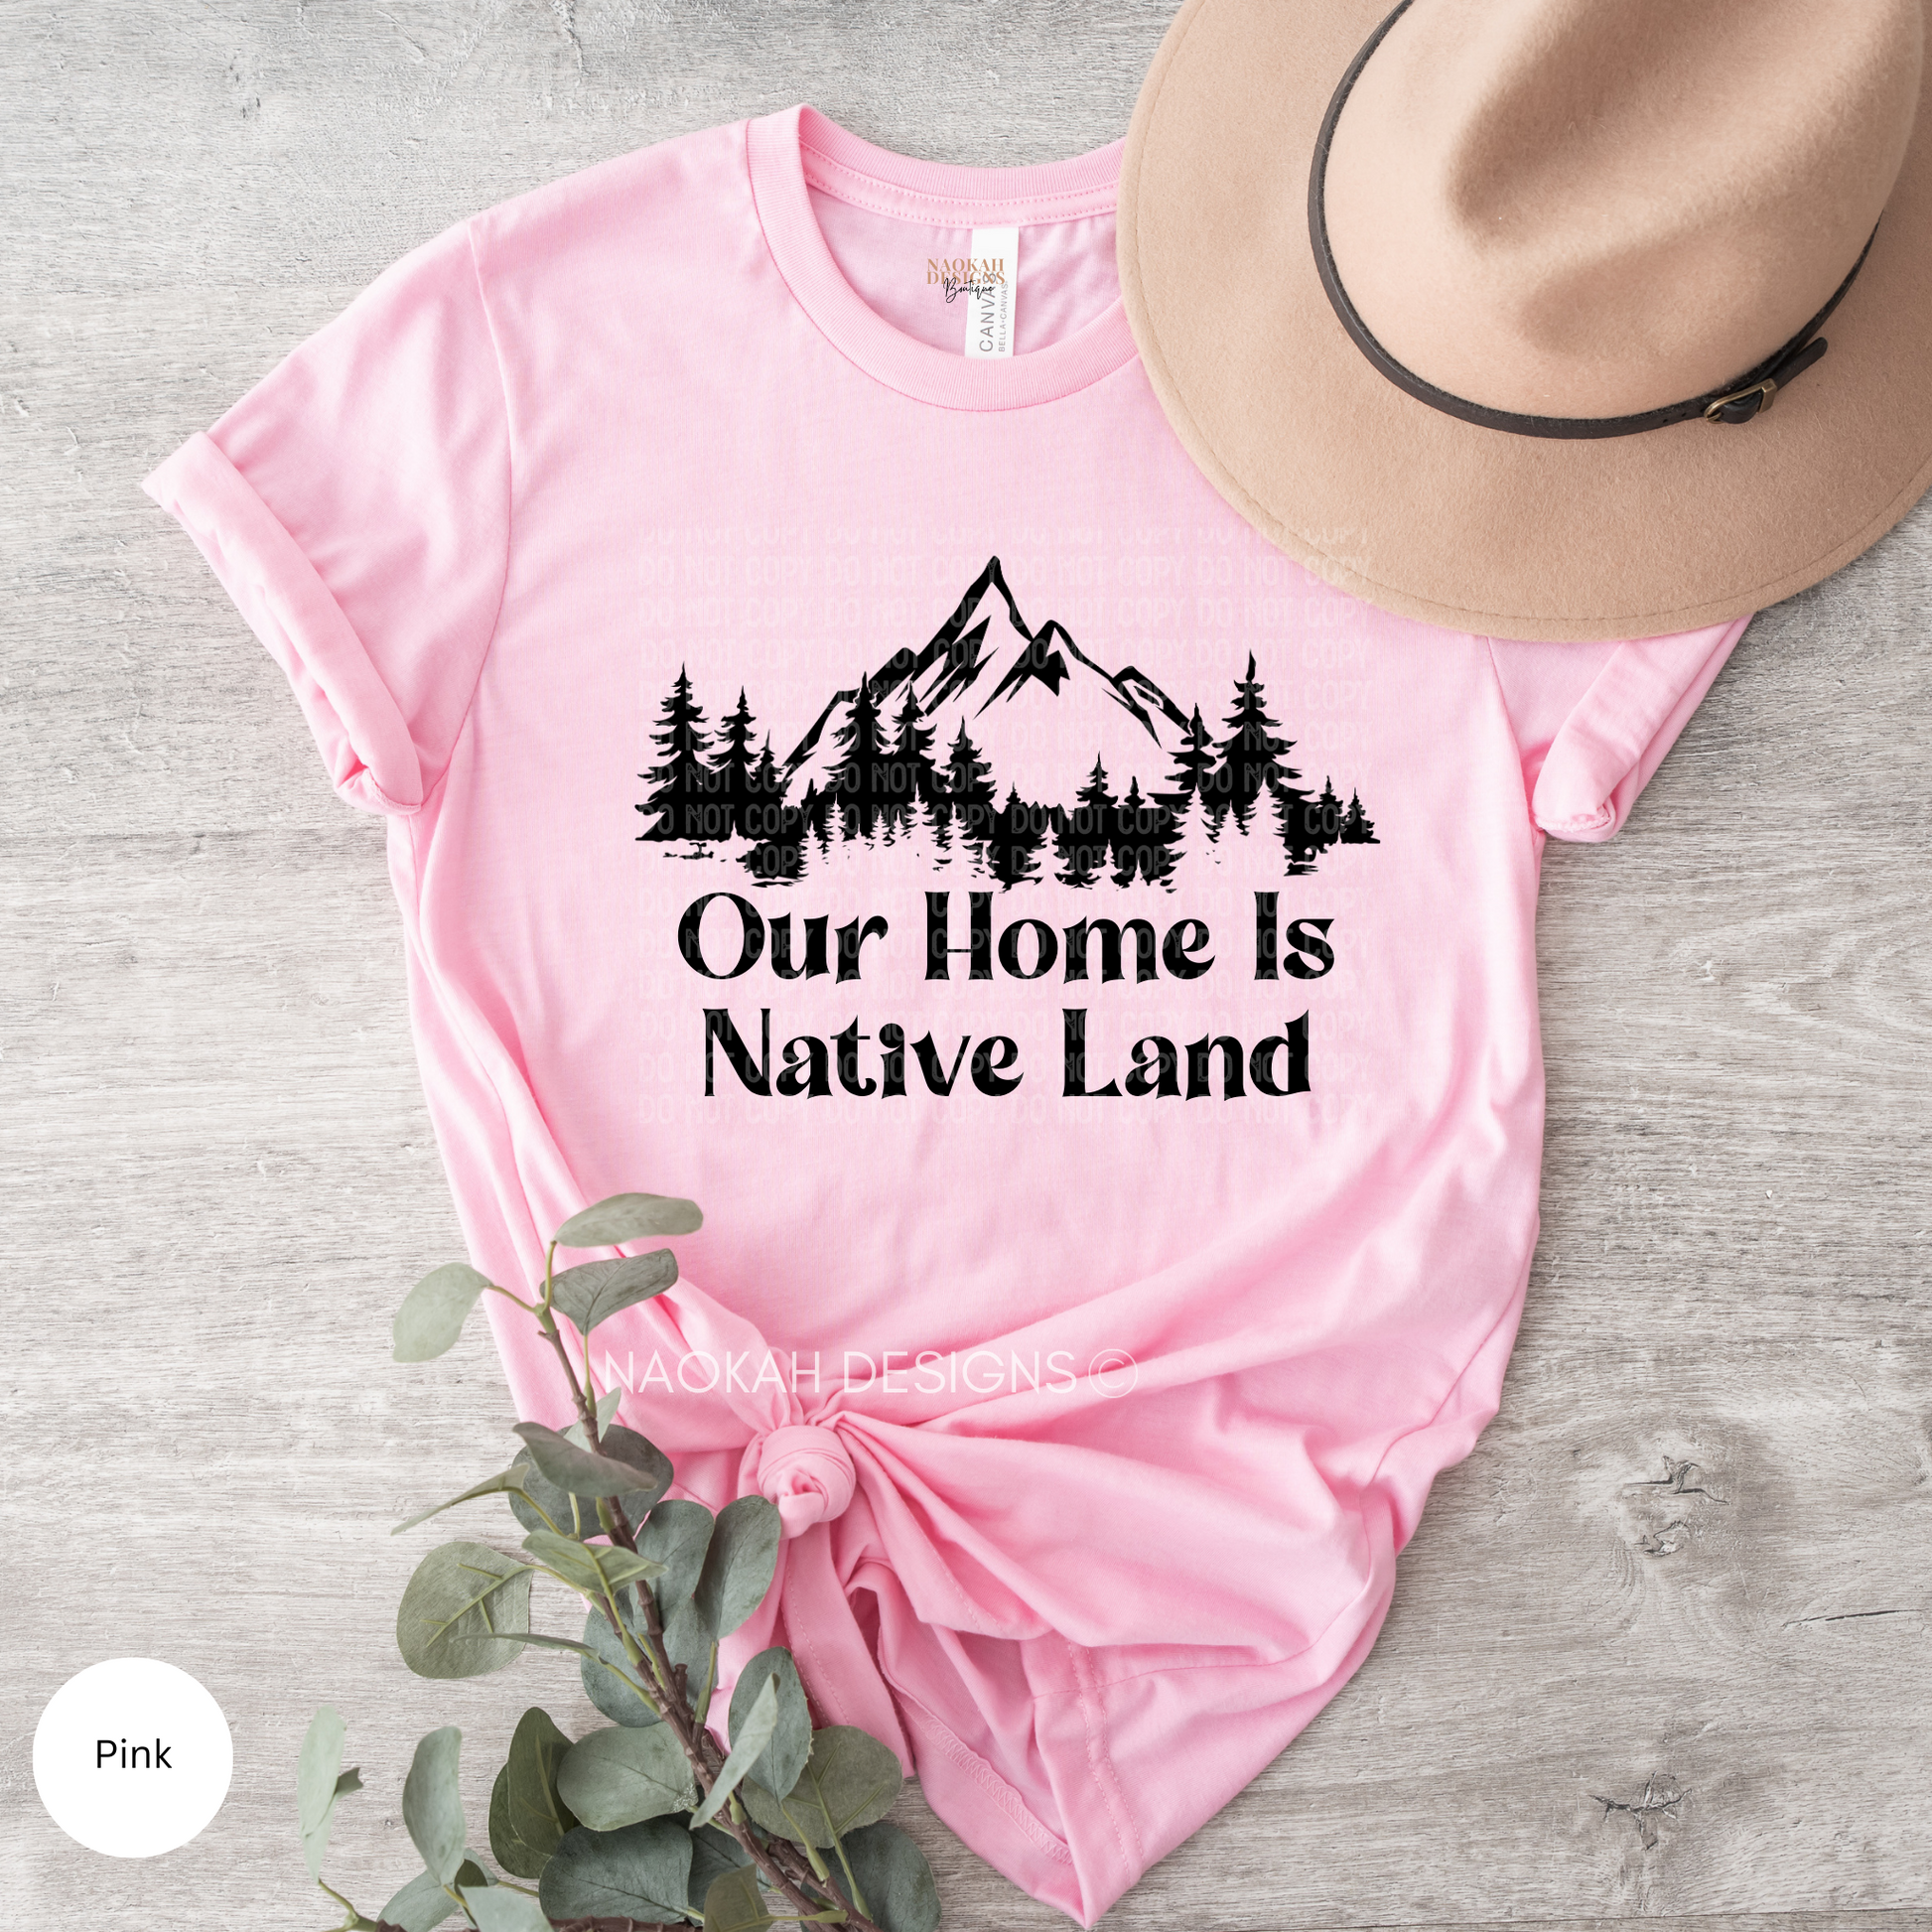 Our Home Is Native Land Shirt, Indigenous t-shirt, Indigenous Pride, Indigenous Resilient Shirt, Native Rights, We Belong To The Land Tee, Indigenous owned shop, Indigenous owned business, Orange shirt day native owned, orange shirt day Indigenous owned